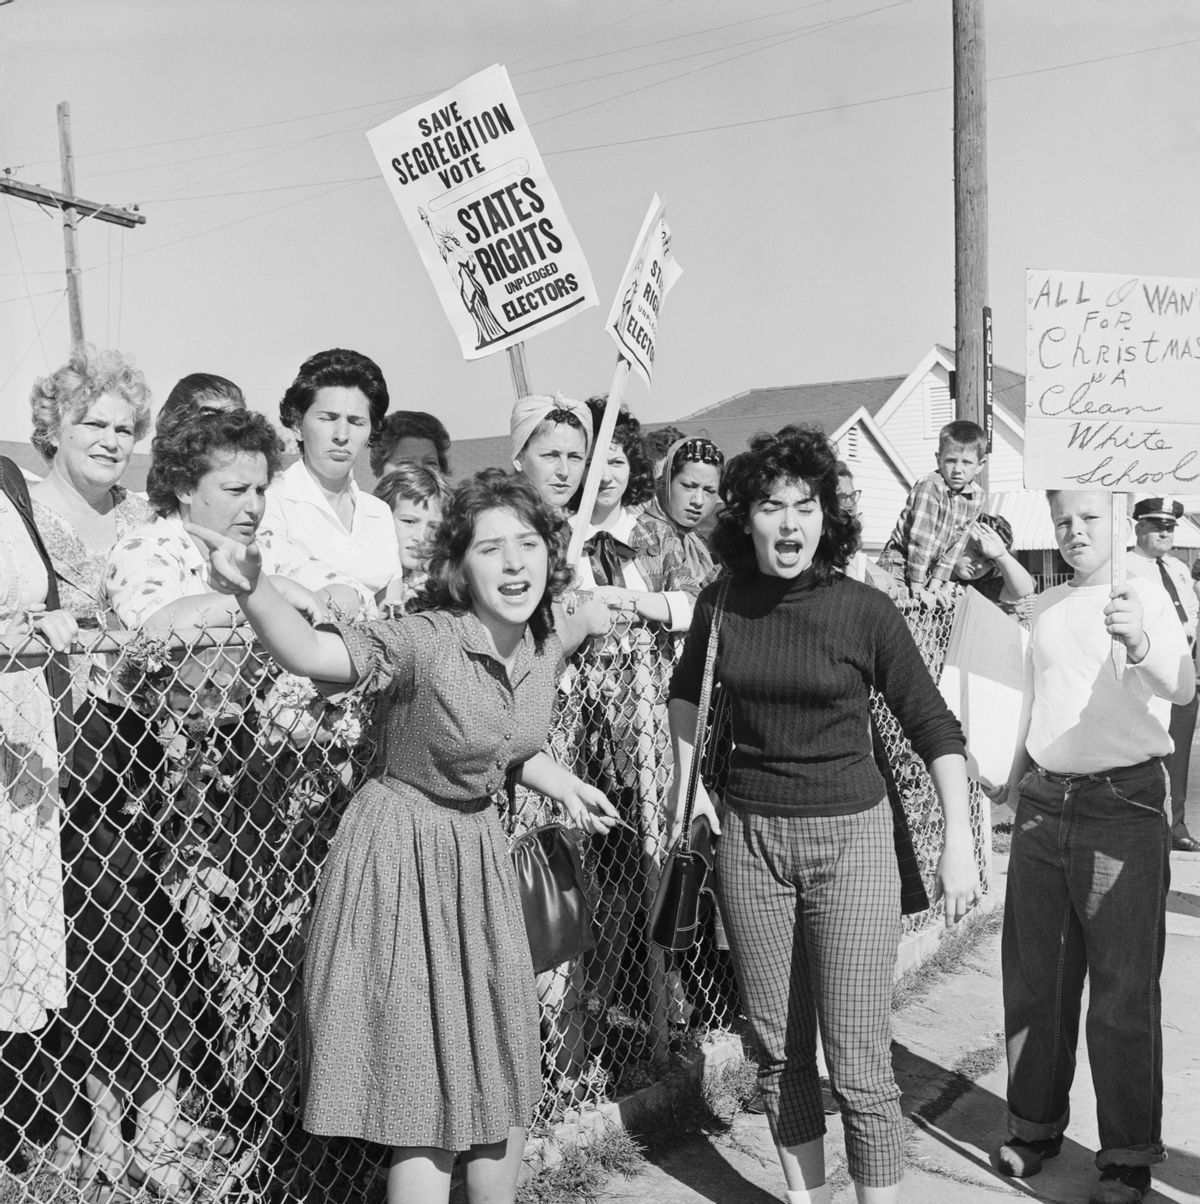 Women at William Franz Elementary School yell at police officers during a protest against desegregation at the school, as three black youngsters attended classes at the school for the second day. Some carry signs stating "All I Want For Christmas is a Clean White School" and "Save Segregation Vote, States Rights Pledged Electors" (Bettmann / Contributor)